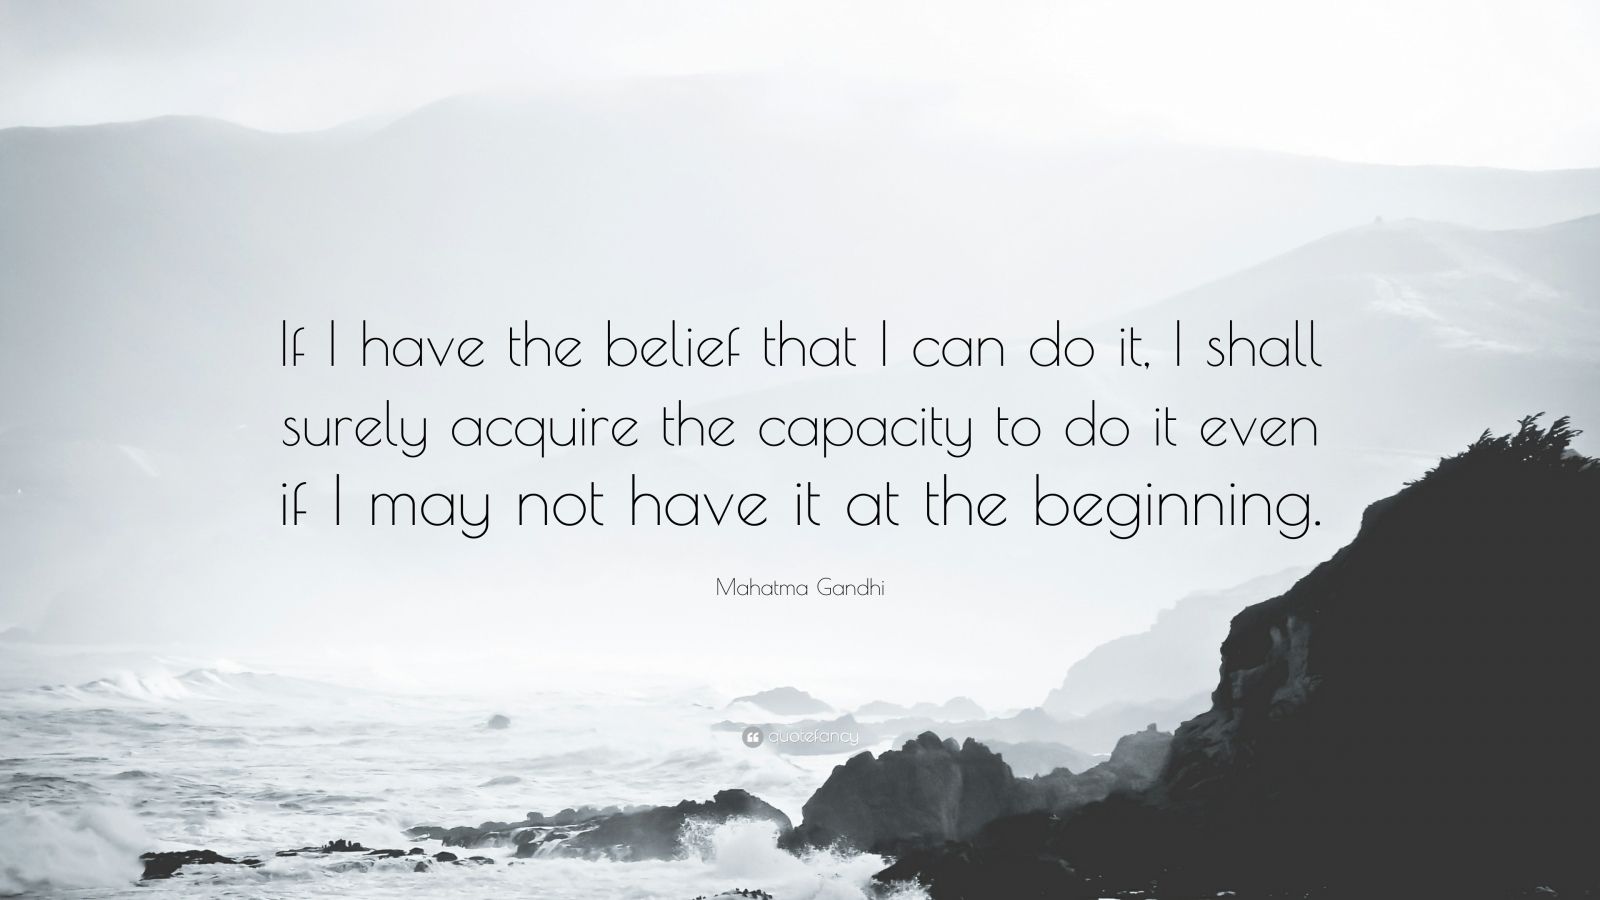 Mahatma Gandhi Quote: “If I have the belief that I can do it, I shall  surely acquire the capacity to do it even if I may not have it at the  beg...”